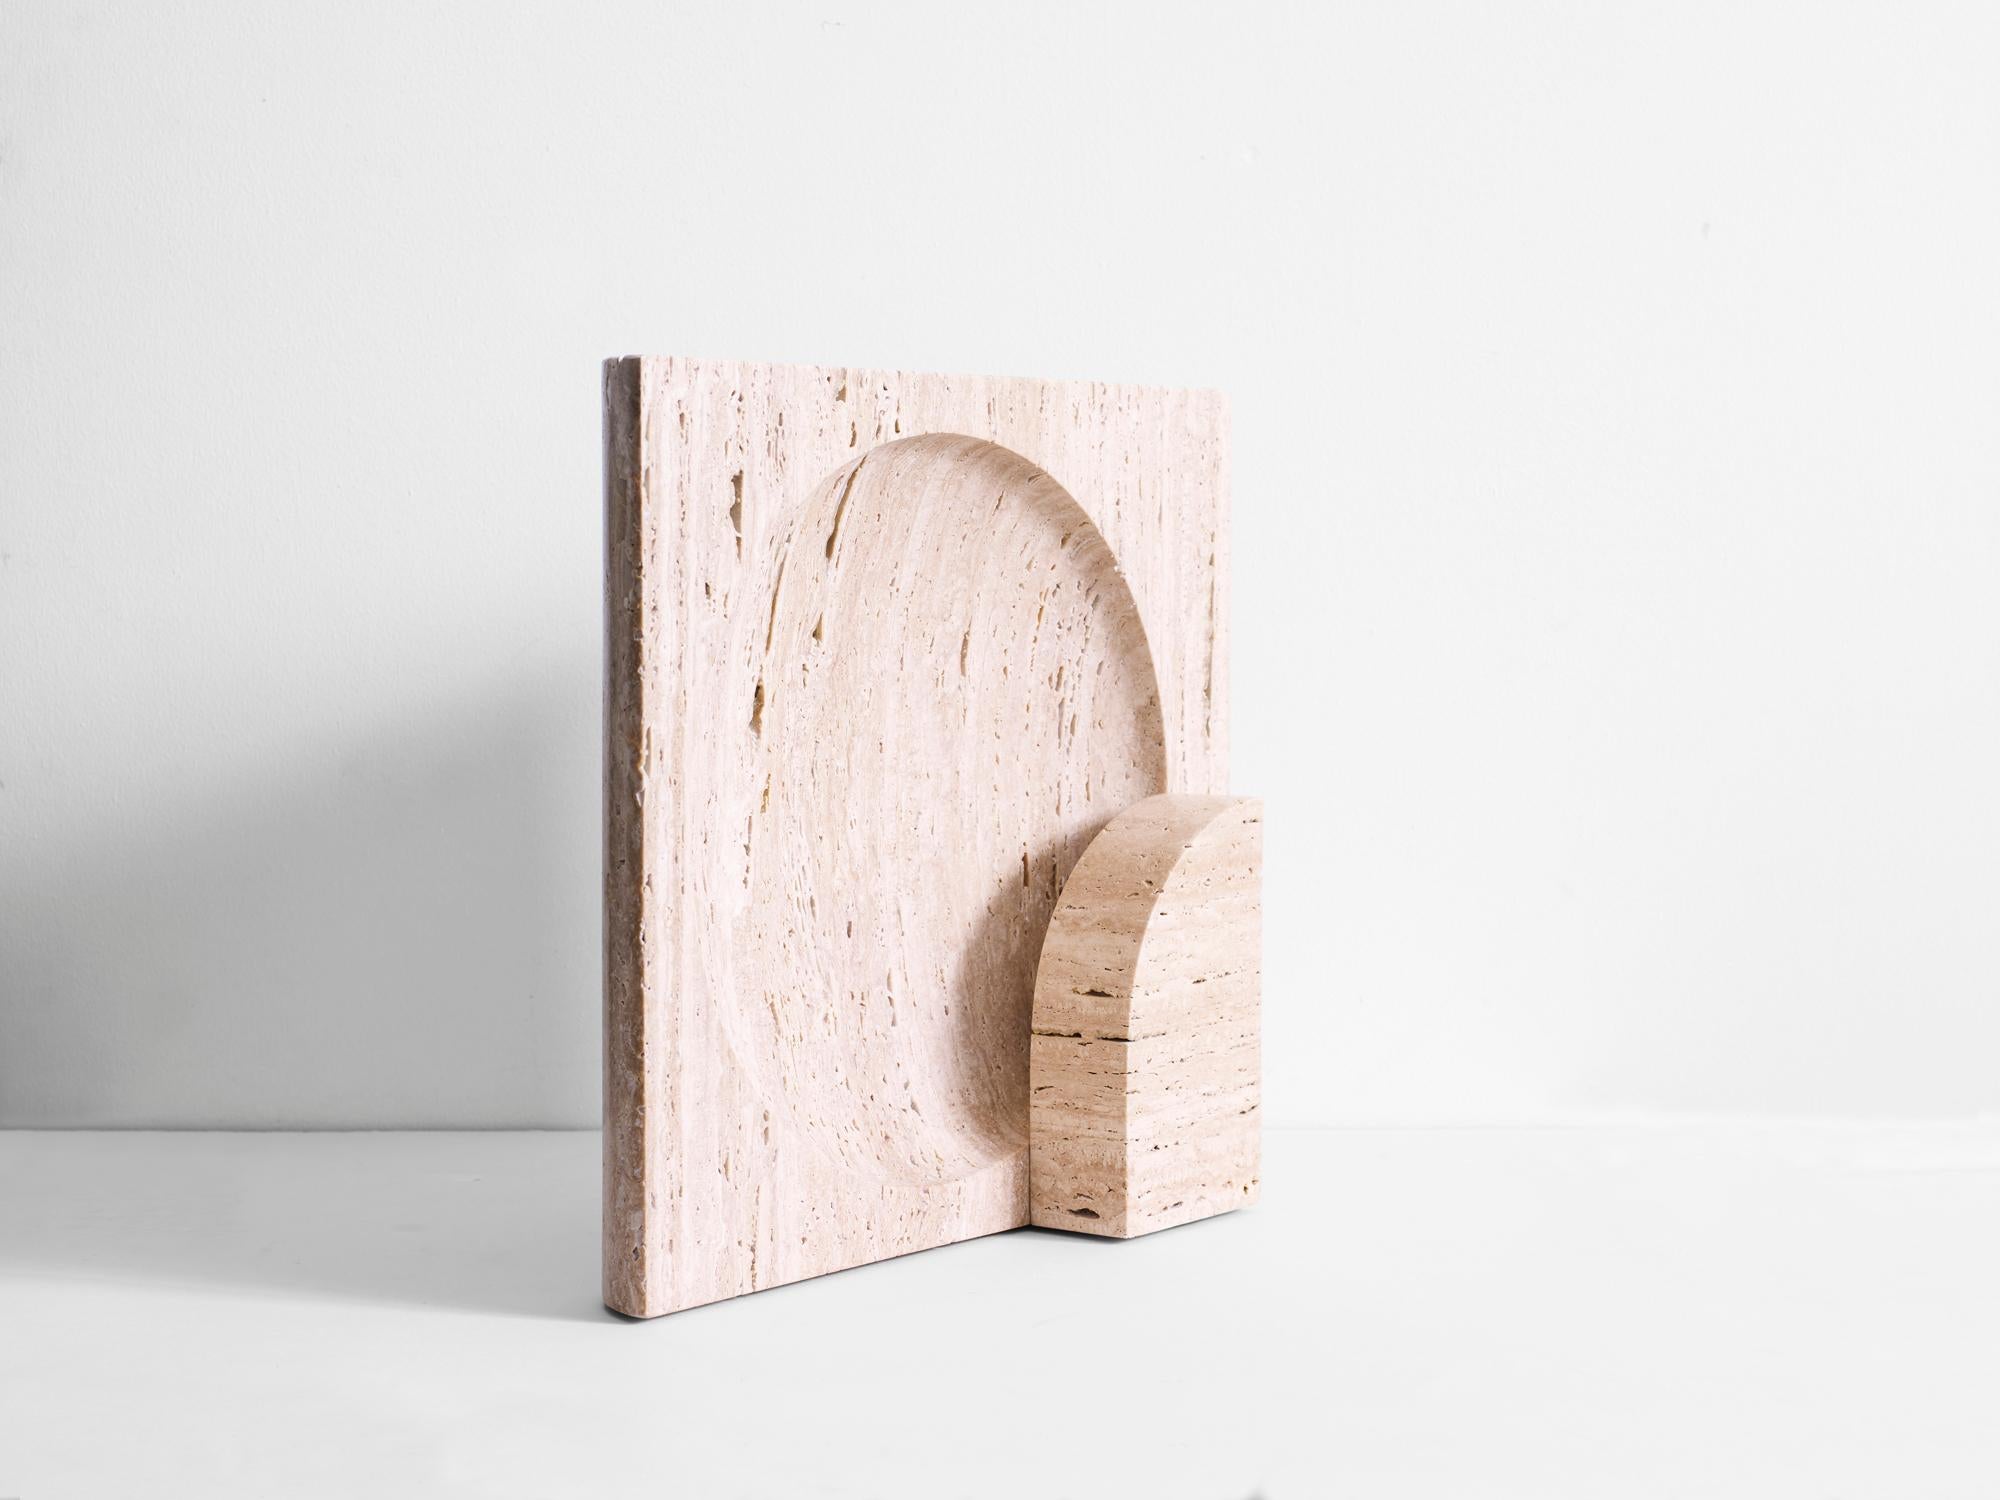 Classico Travertine Block Sconce by Henry Wilson
Dimensions: W 35 x D 11 x H 35 cm
Materials: Classico Travertine

This sculptural item is handmade in Sydney, Australia.

This block table lamp is an ambient, sculptural light carved in two halves